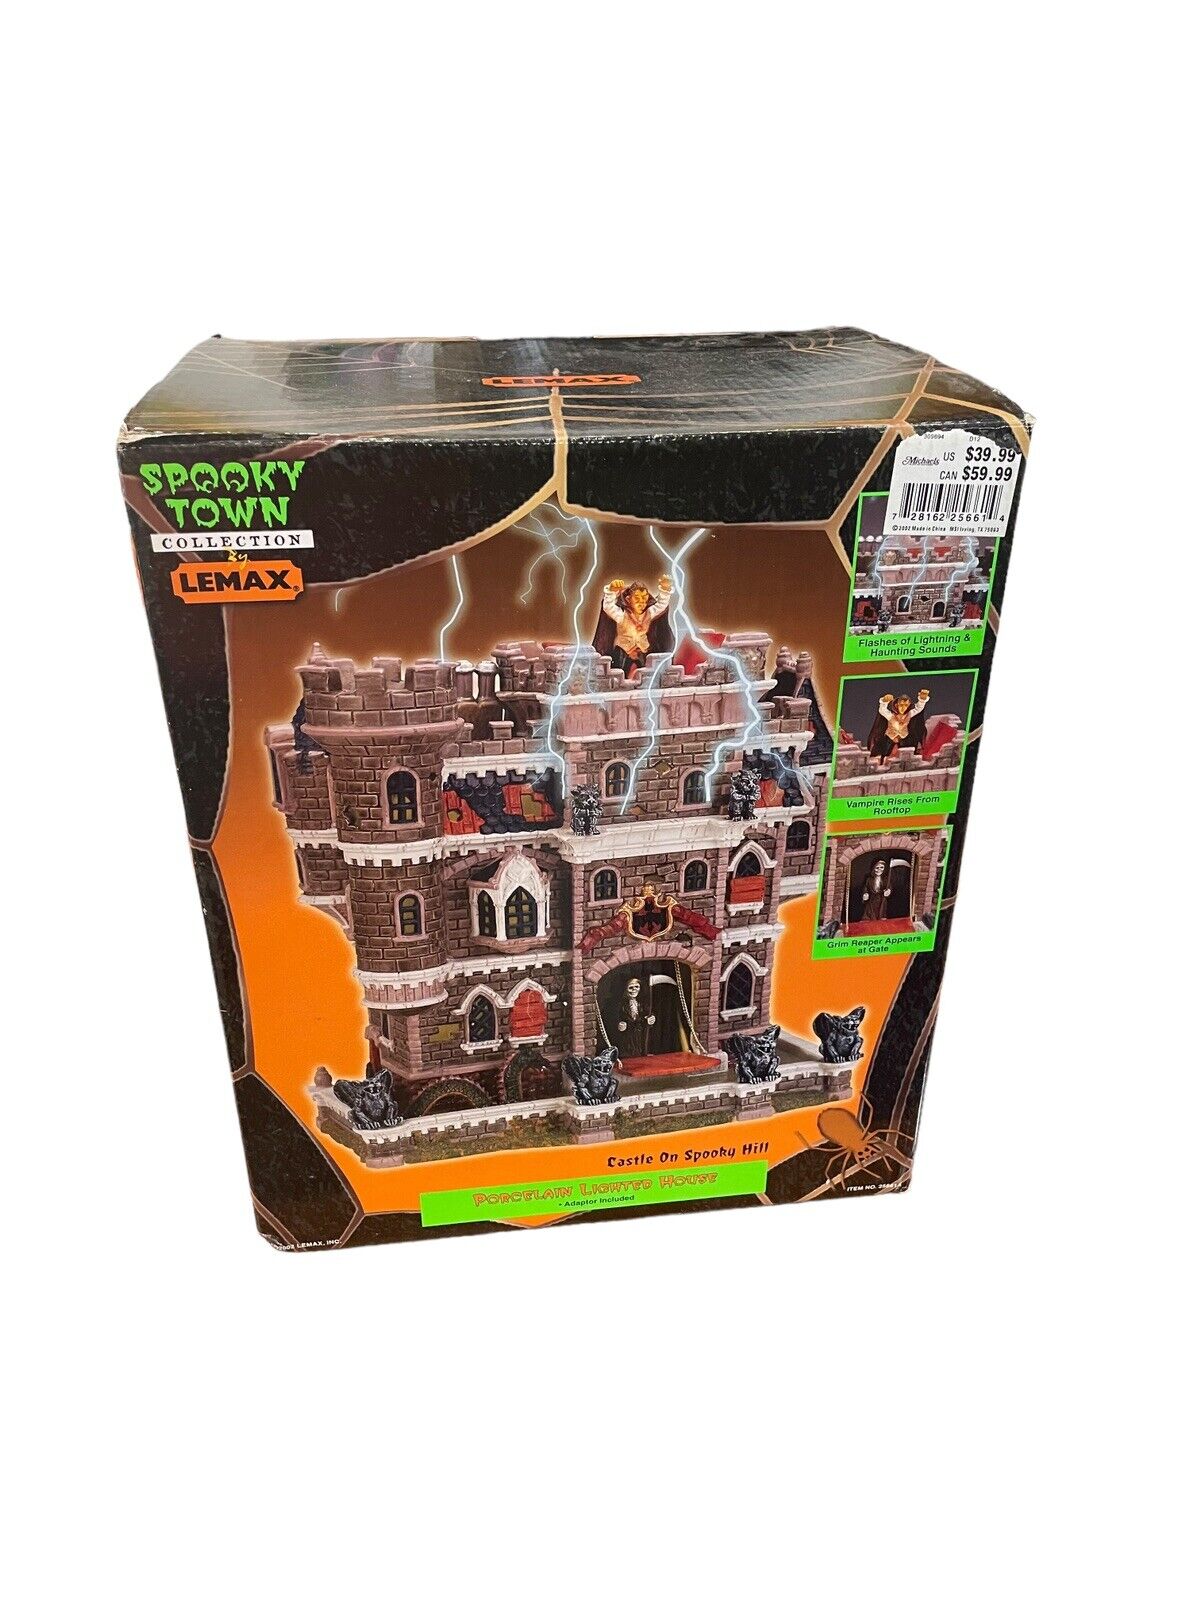 Lemax Spooky Town 2002 Castle On Spooky Hill Halloween House - UNTESTED - READ